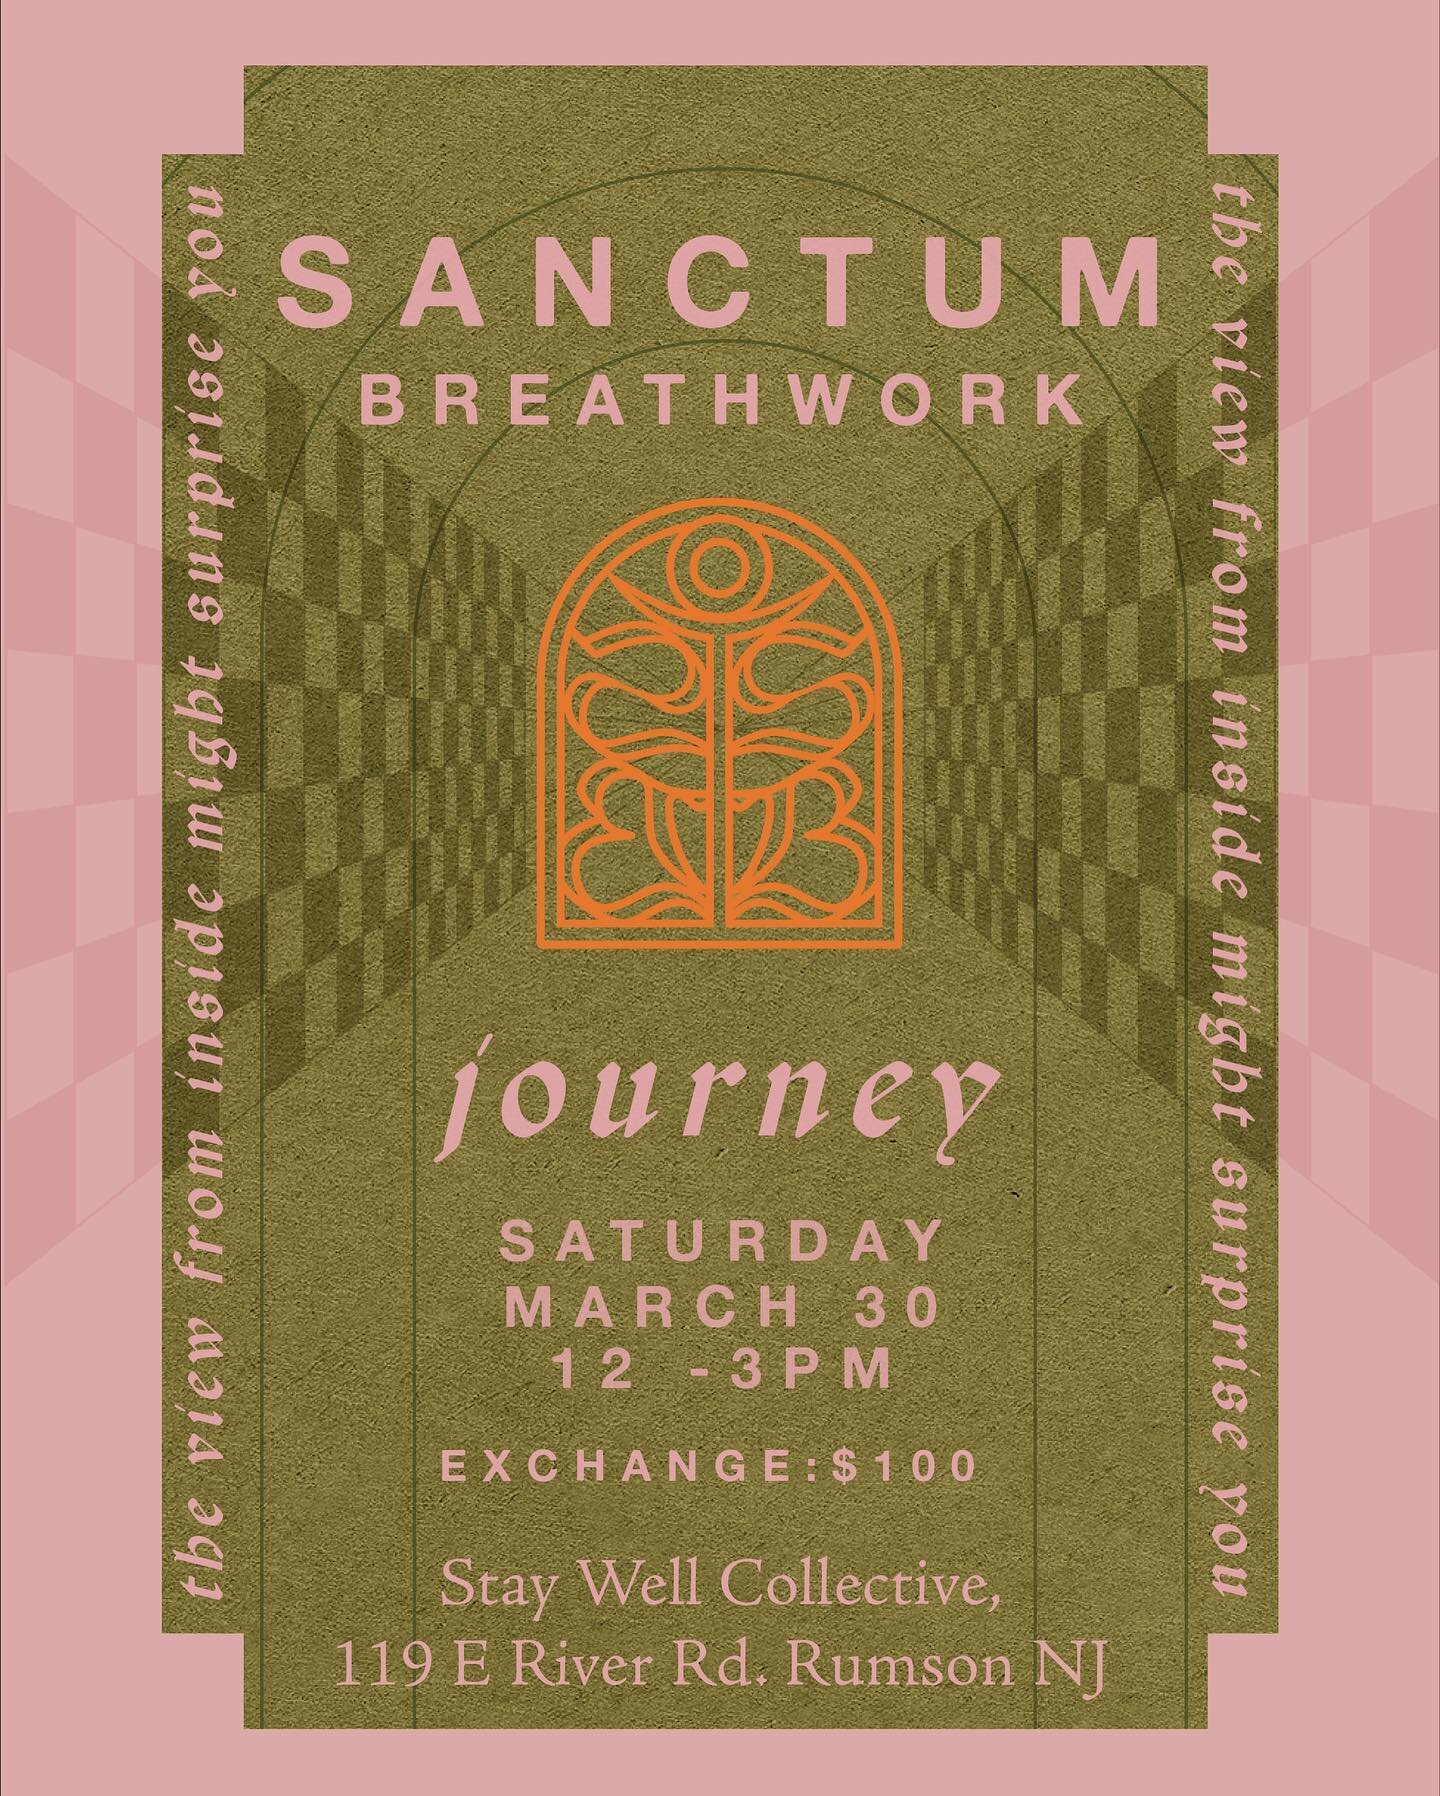 As part of the visual identity created for Sanctum Breathwork I created posters for Melissa so she will be able to update the date and location to use for future events. The design is a balance of mysterious and lighthearted with soft psychedelic ref